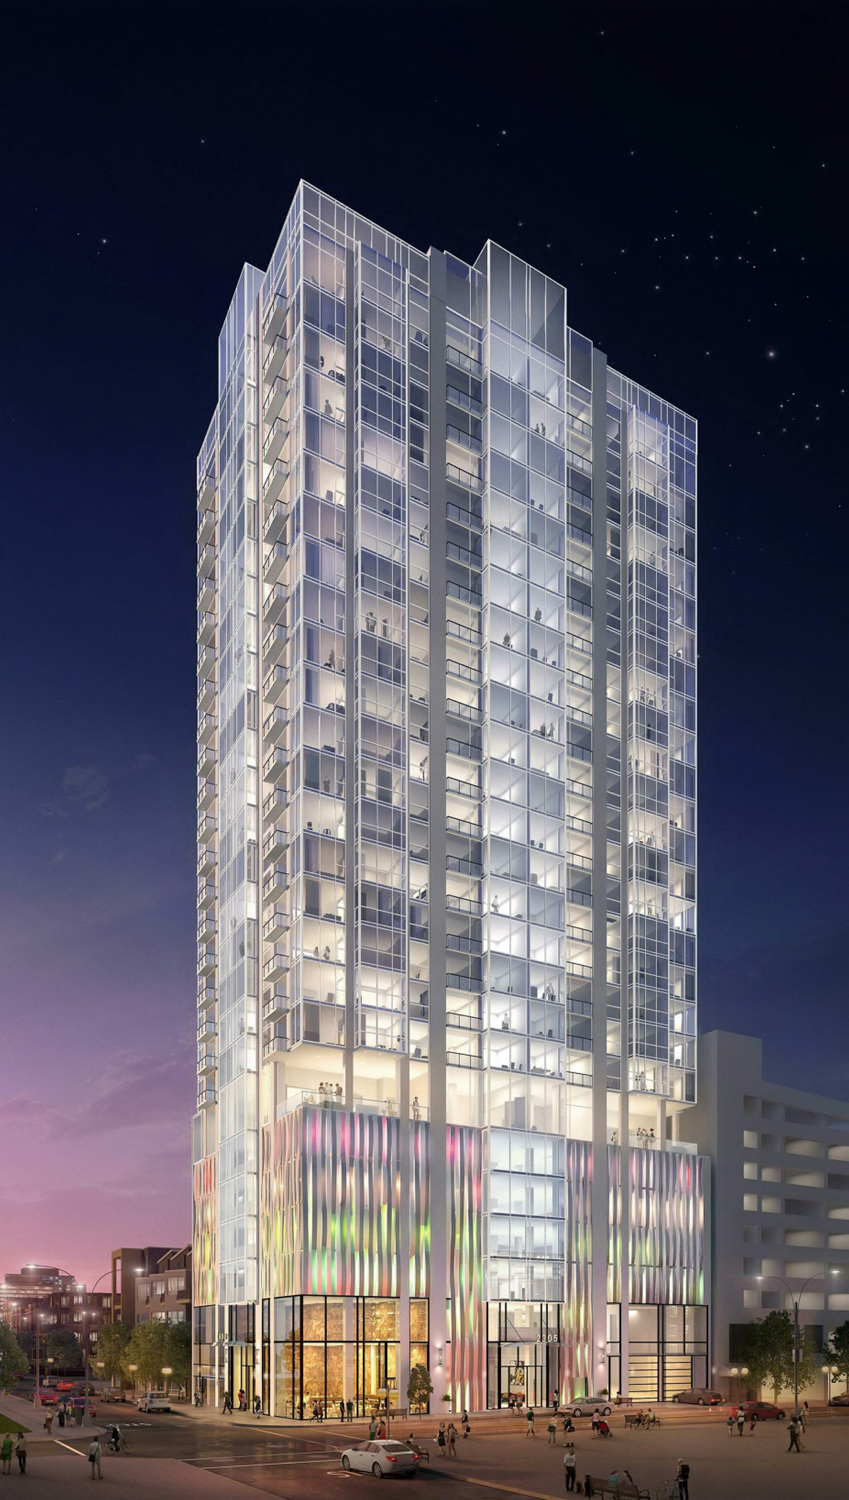 2305 Webster Street, rendering by Ankrom Moisan Architects